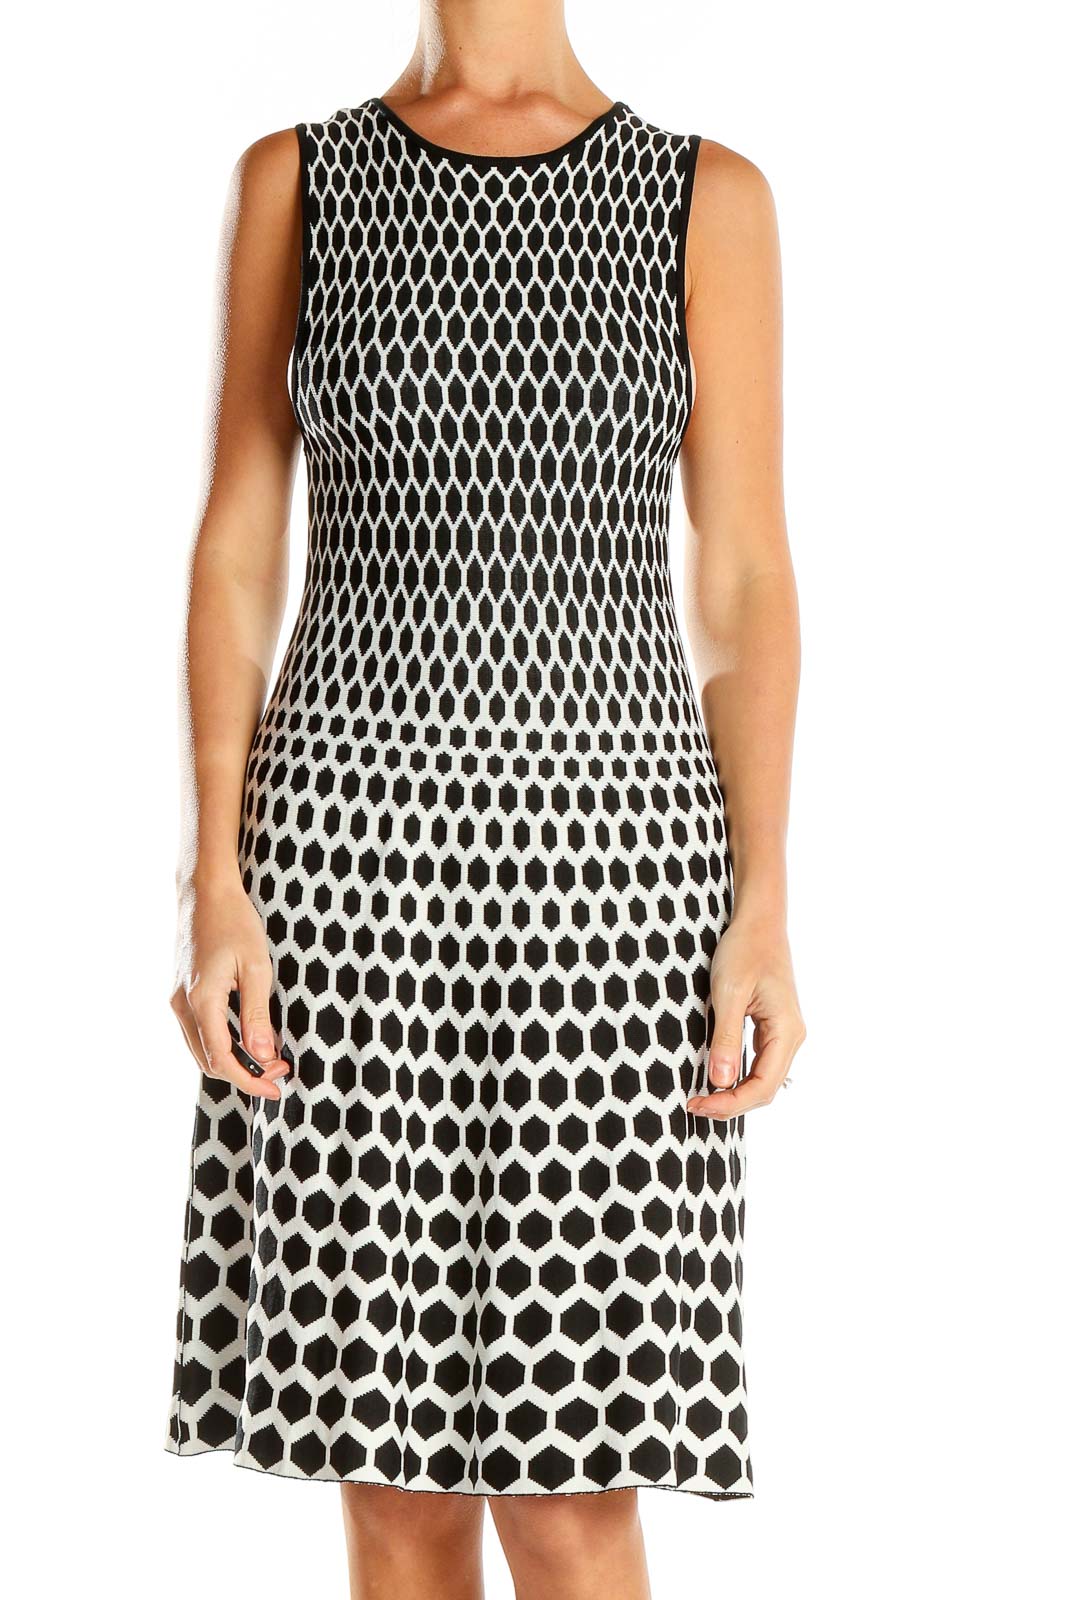 White Black Printed Classic Fit & Flare Dress Front